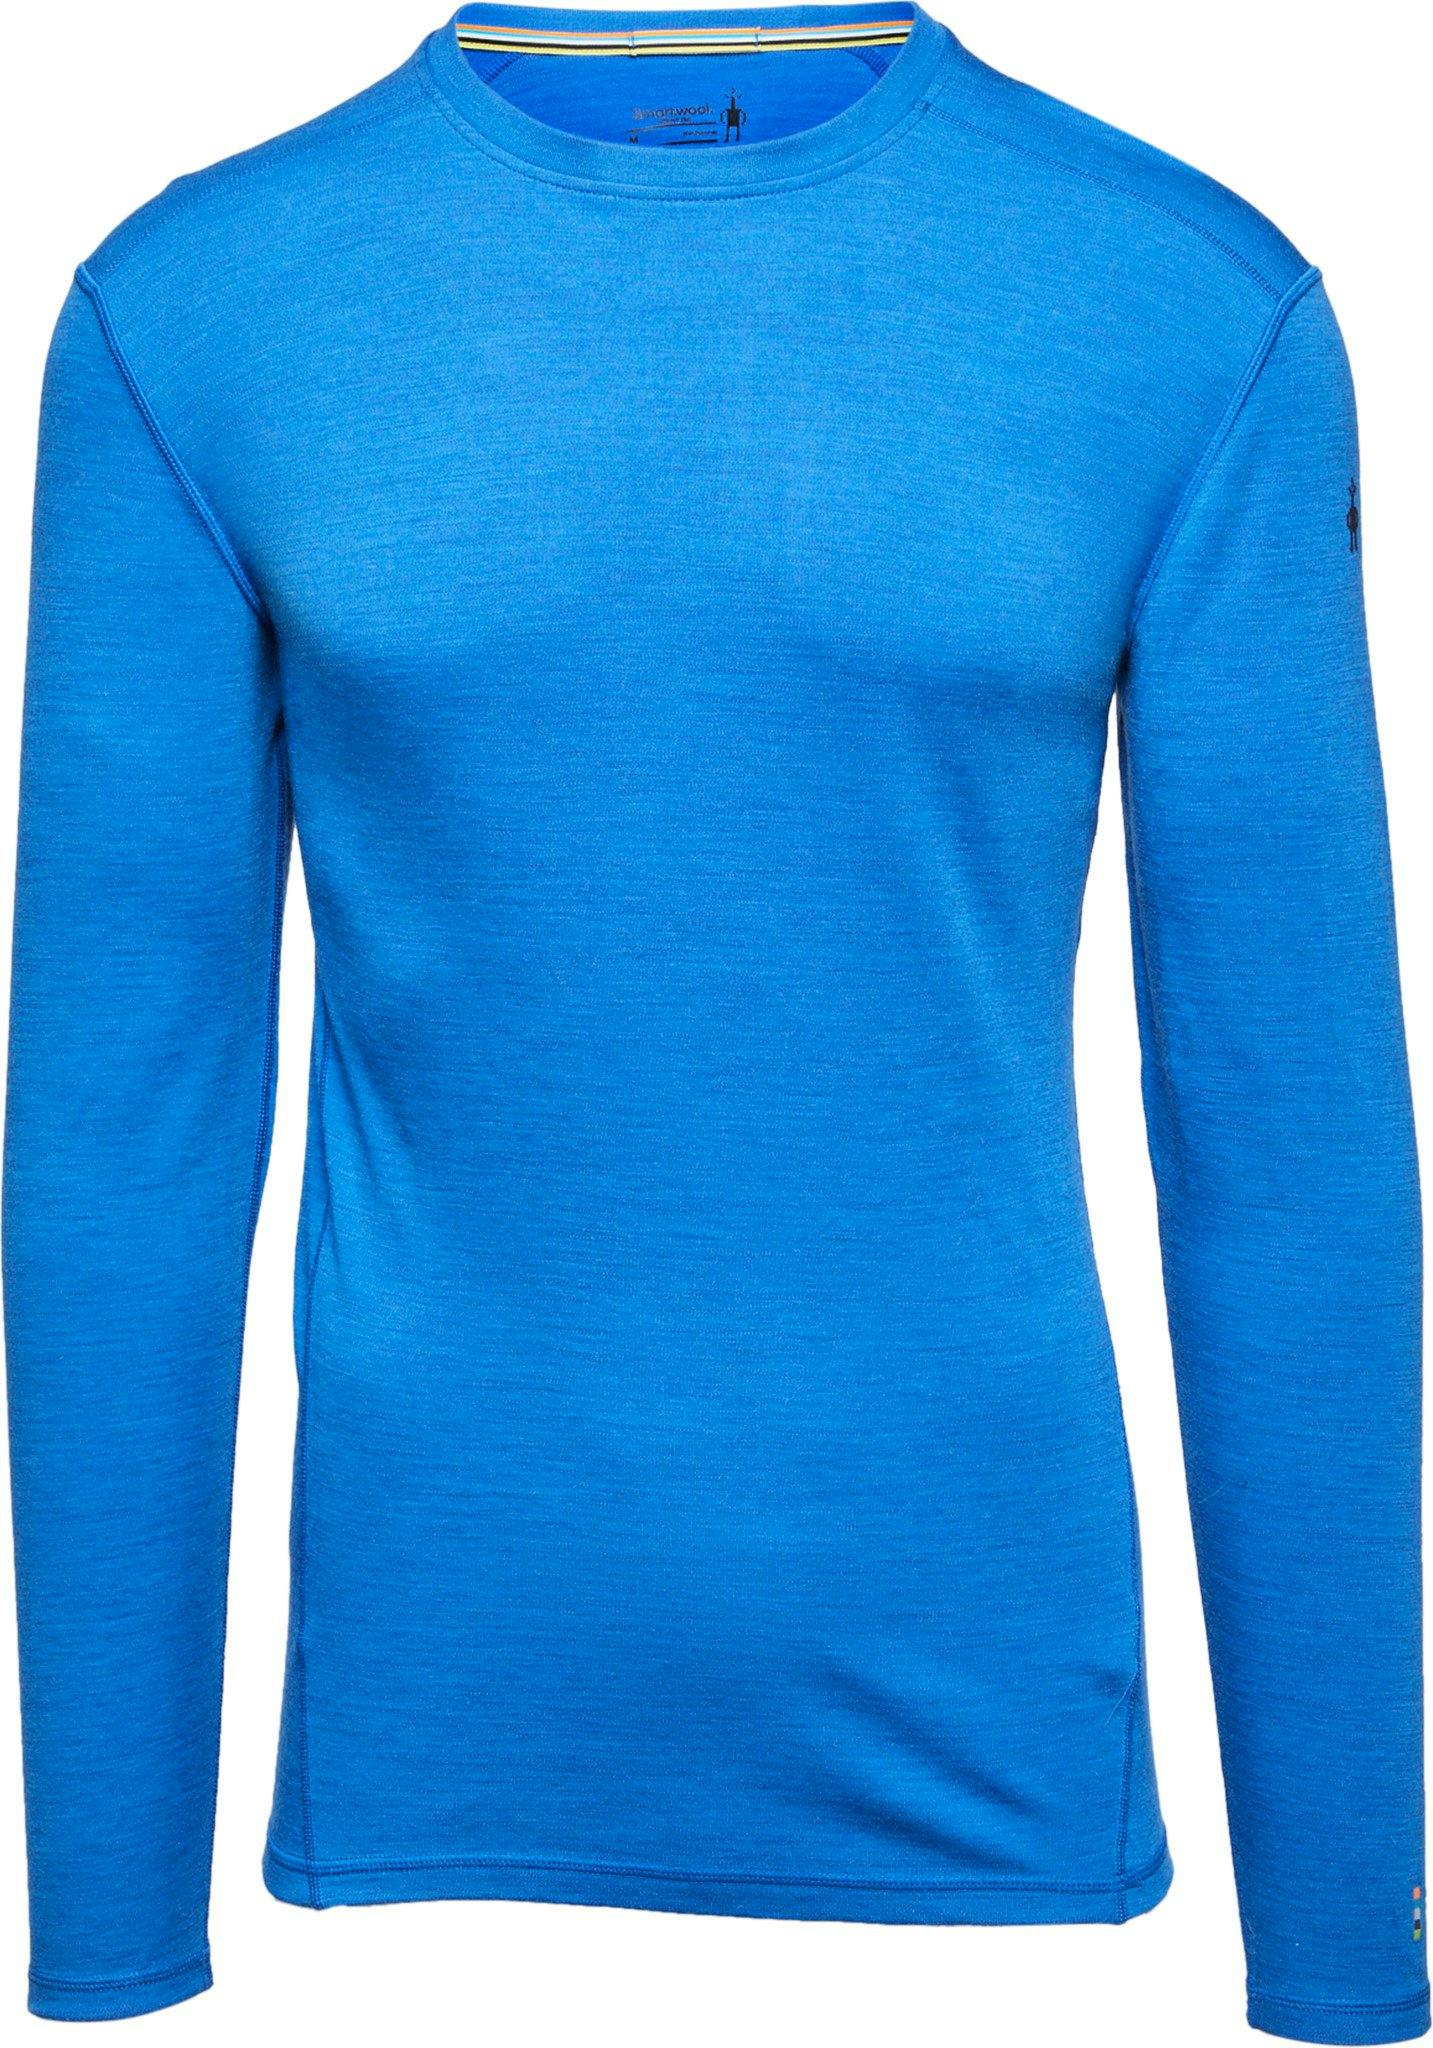 Product image for Classic Thermal Merino Base Layer Crew Boxed Tee - Men's